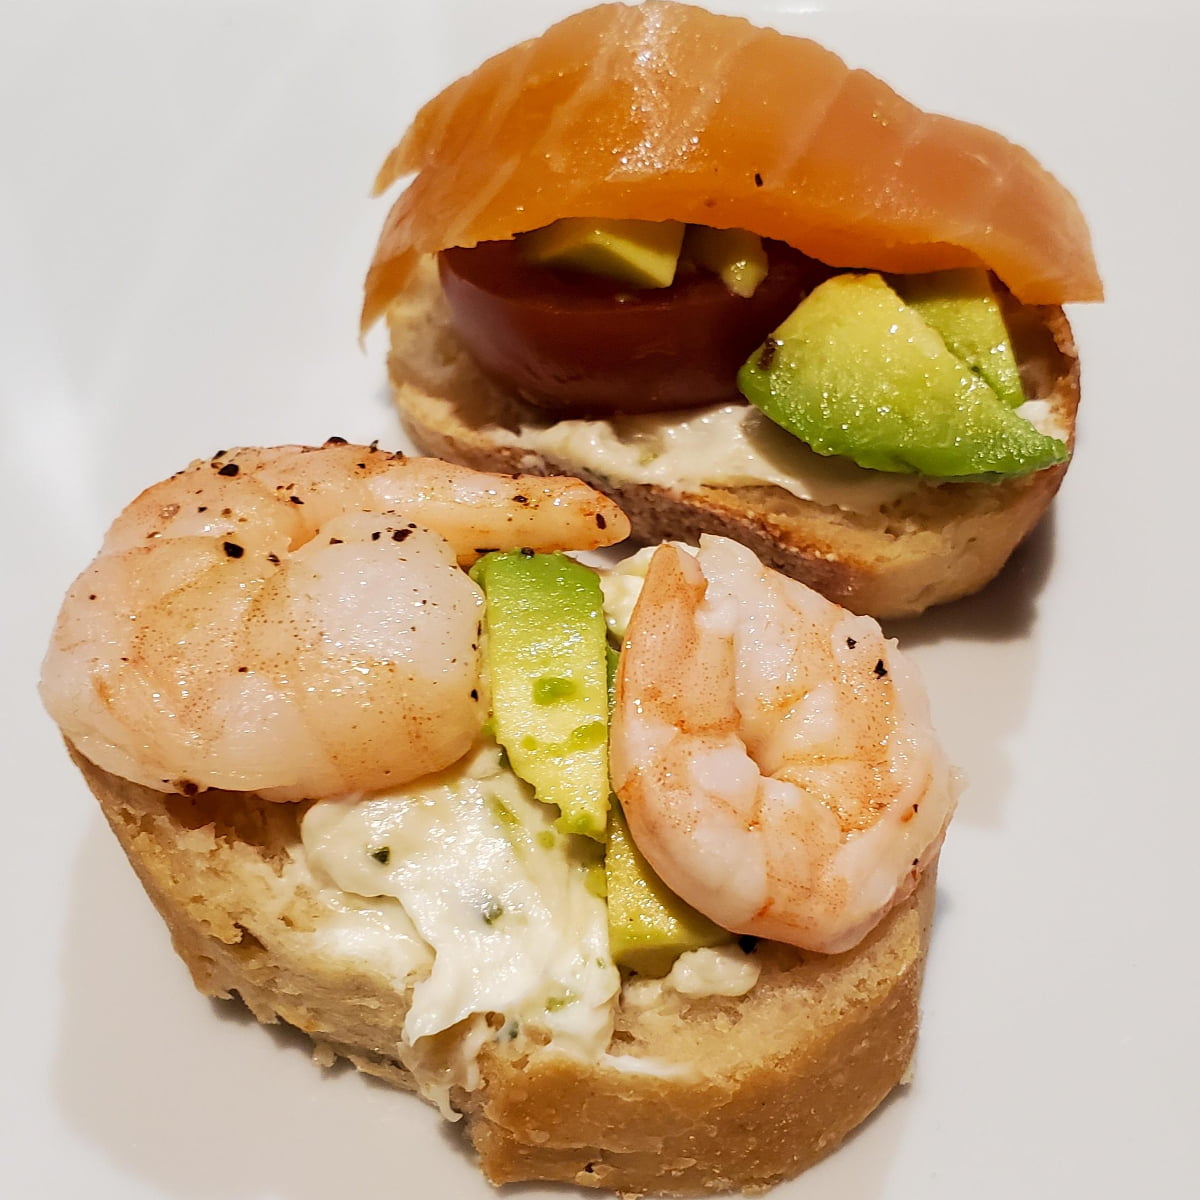 Shrimp and smoked salmon baguettes with avocado and tomato. And a roasted garlic spread from Cleveland cooking